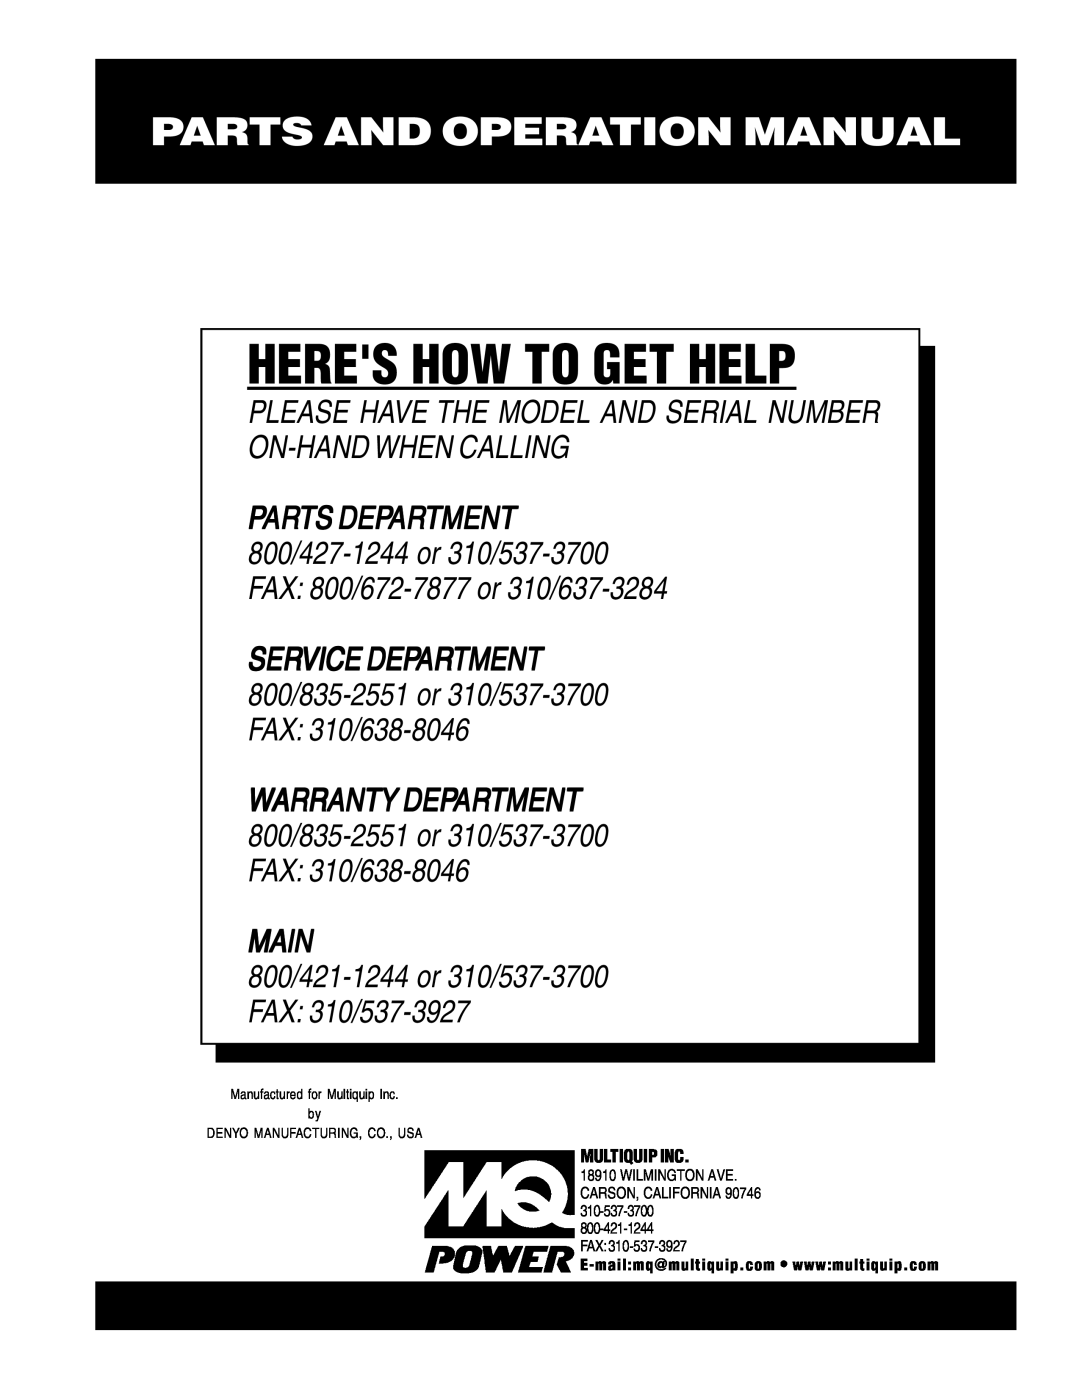 Multiquip SGW-250SS operation manual Heres How To Get Help, Main, 800/421-1244or 310/537-3700FAX 310/537-3927, Fax 